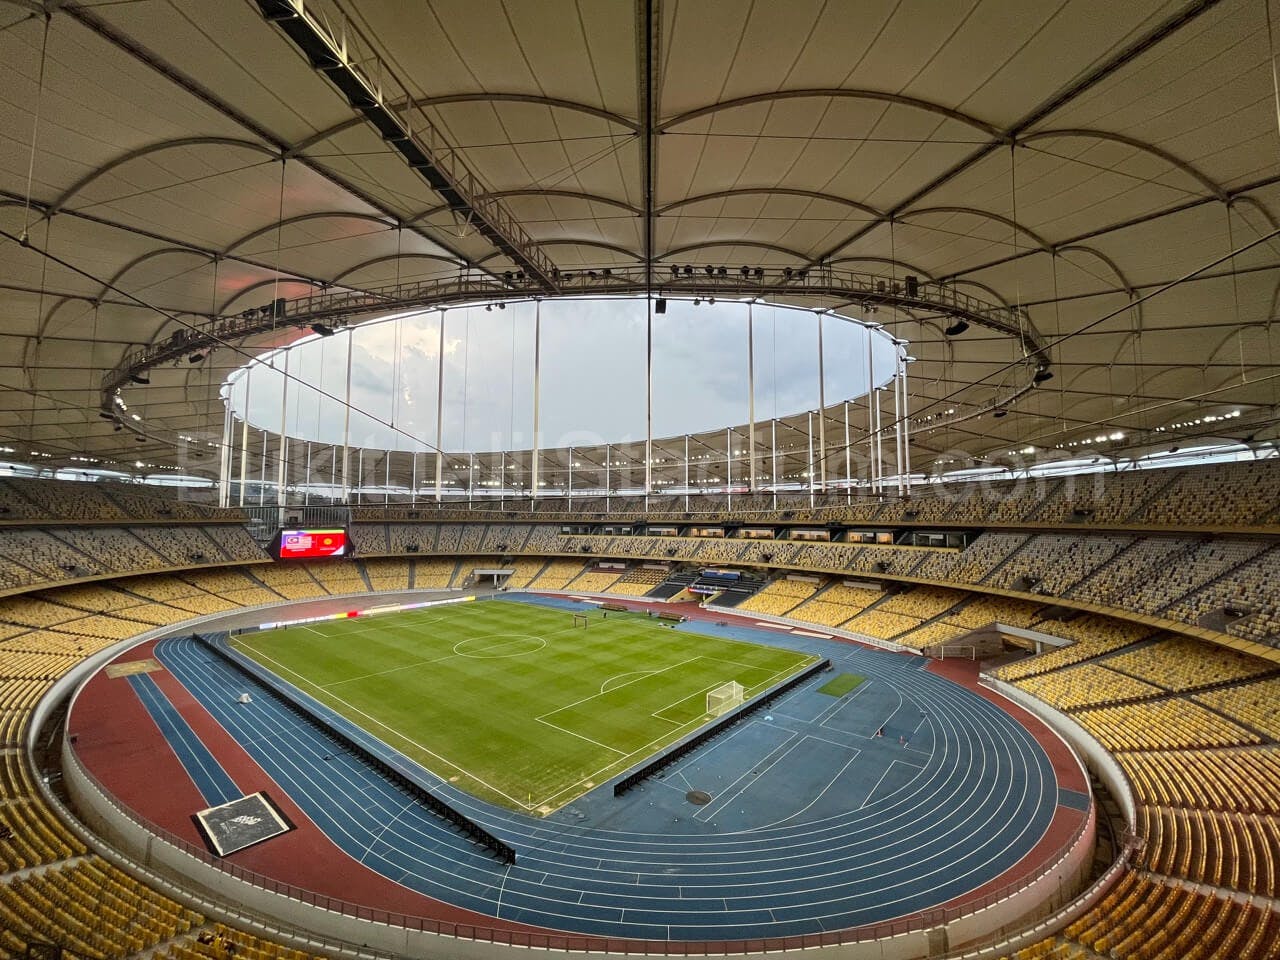 0.5x View of Bukit Jalil field from section 309 of Stadium Bukit Jalil.